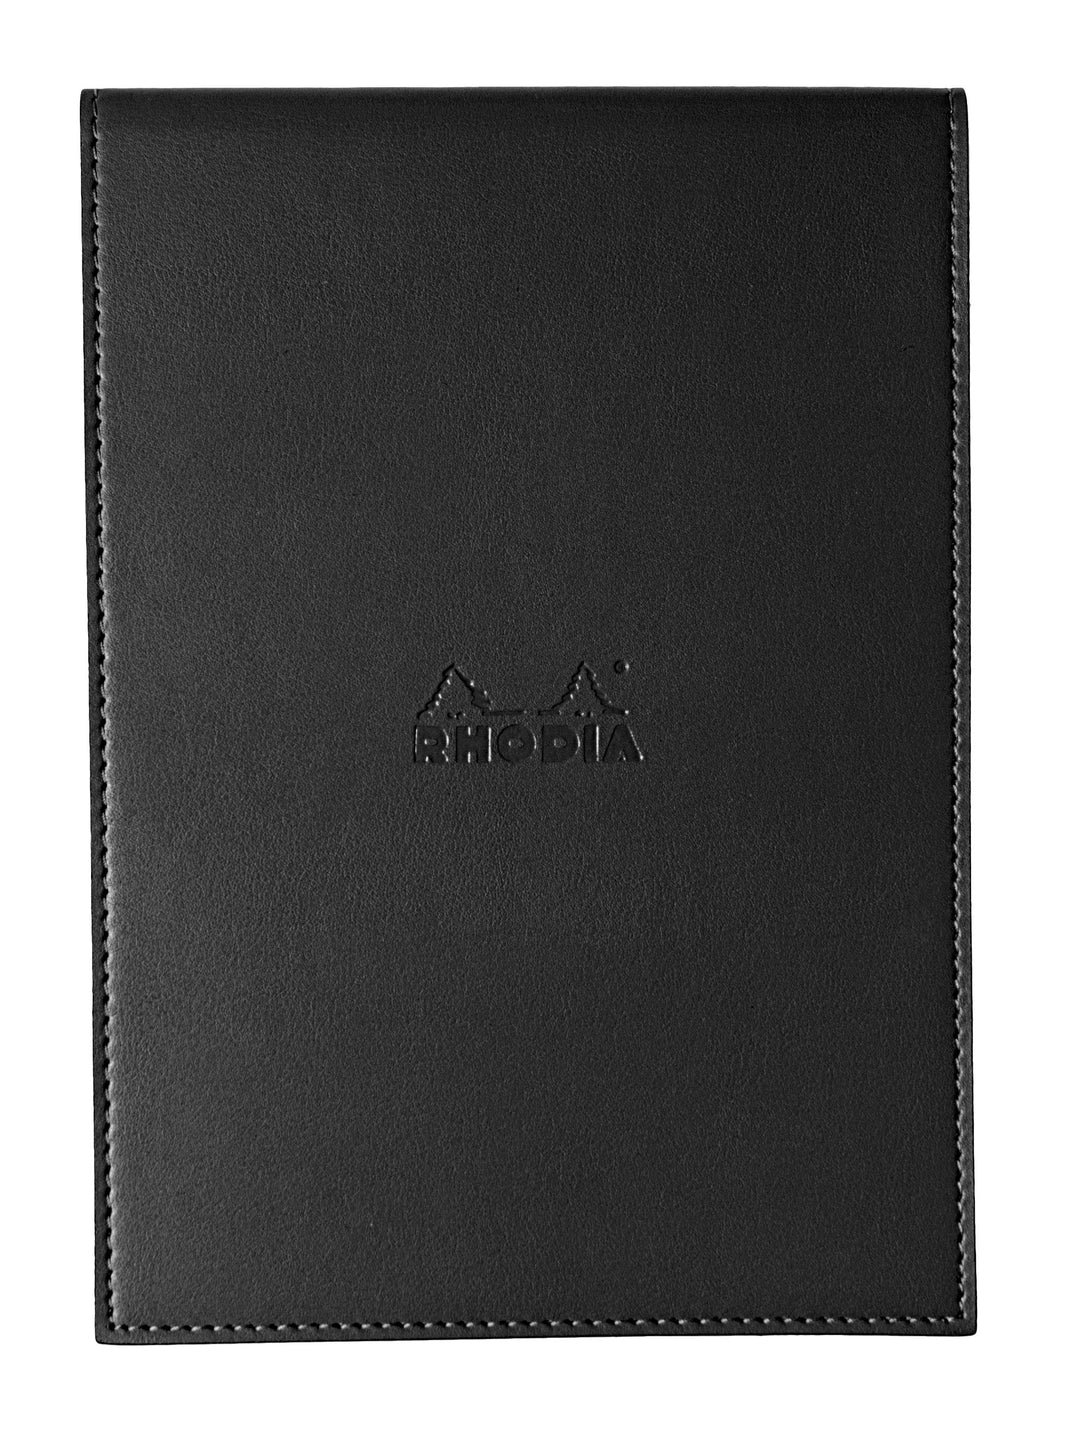 Rhodia Boutique Stapled Line Ruled Notepad with Leatherette Cover - A5